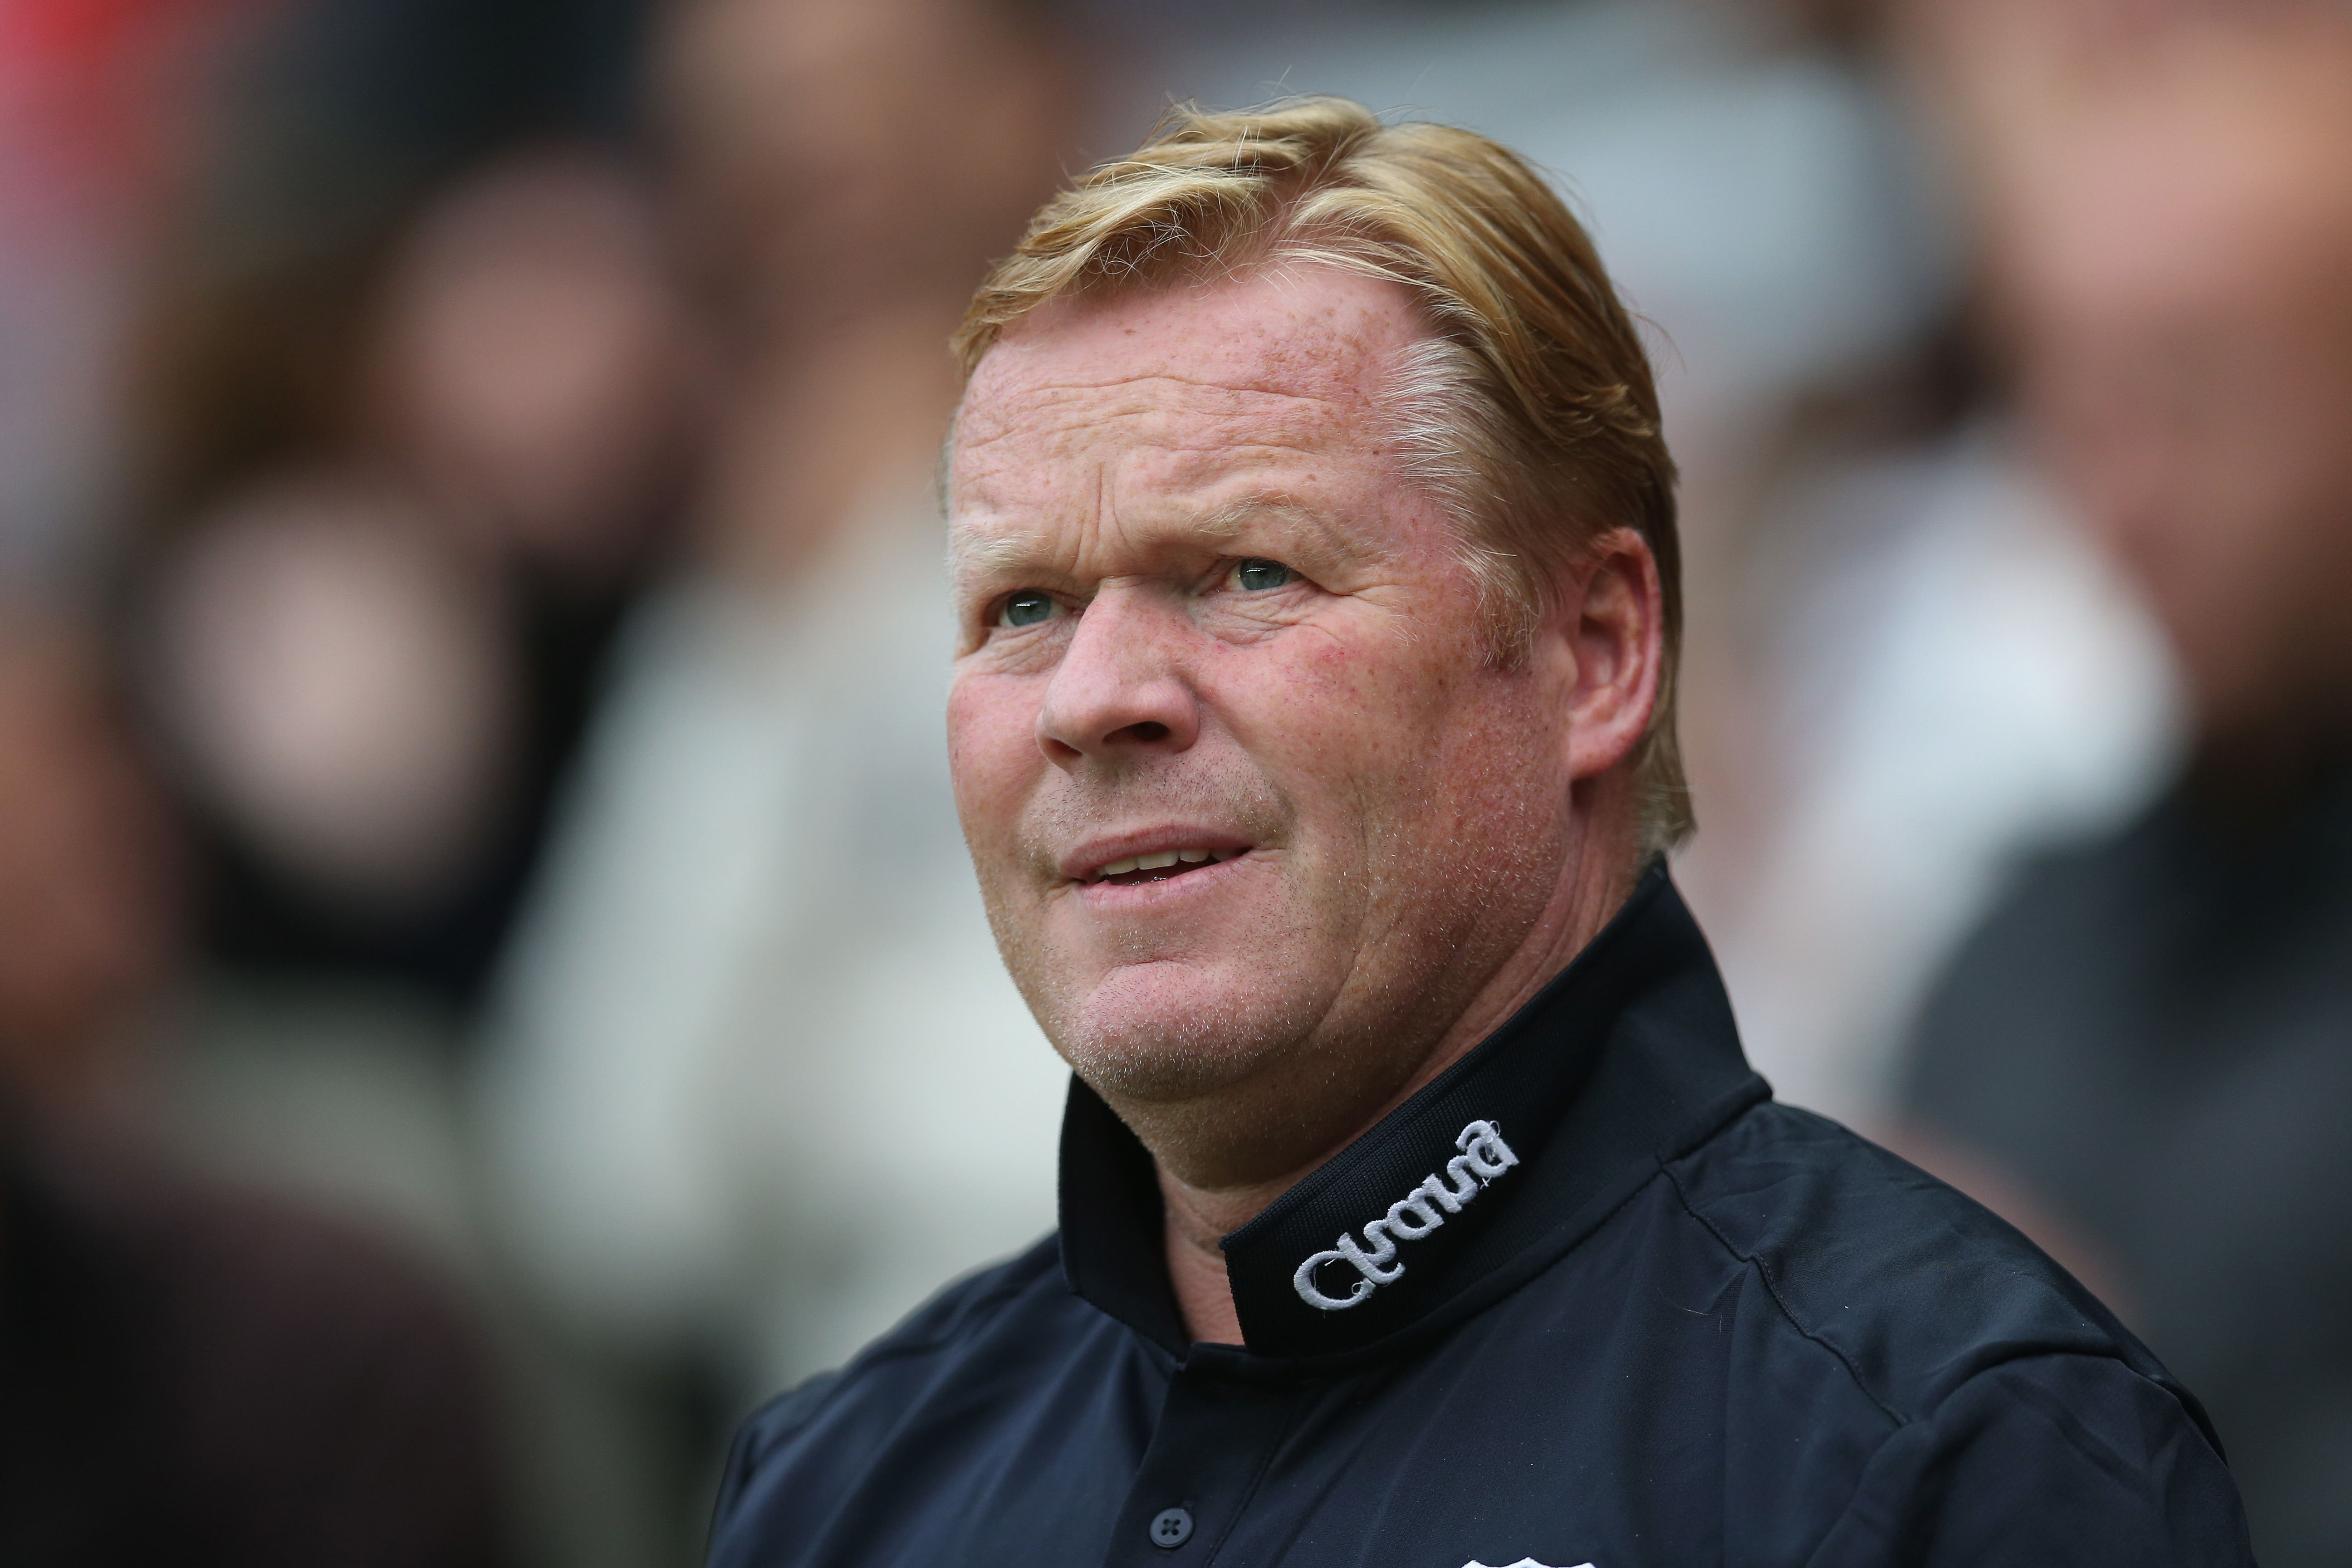 MILTON KEYNES, ENGLAND - JULY 26:  Everton manager Ronald Koeman during the pre-season friendly match between MK Dons and Everton at Stadium mk on July 26, 2016 in Milton Keynes, England.  (Photo by Alex Morton/Getty Images)